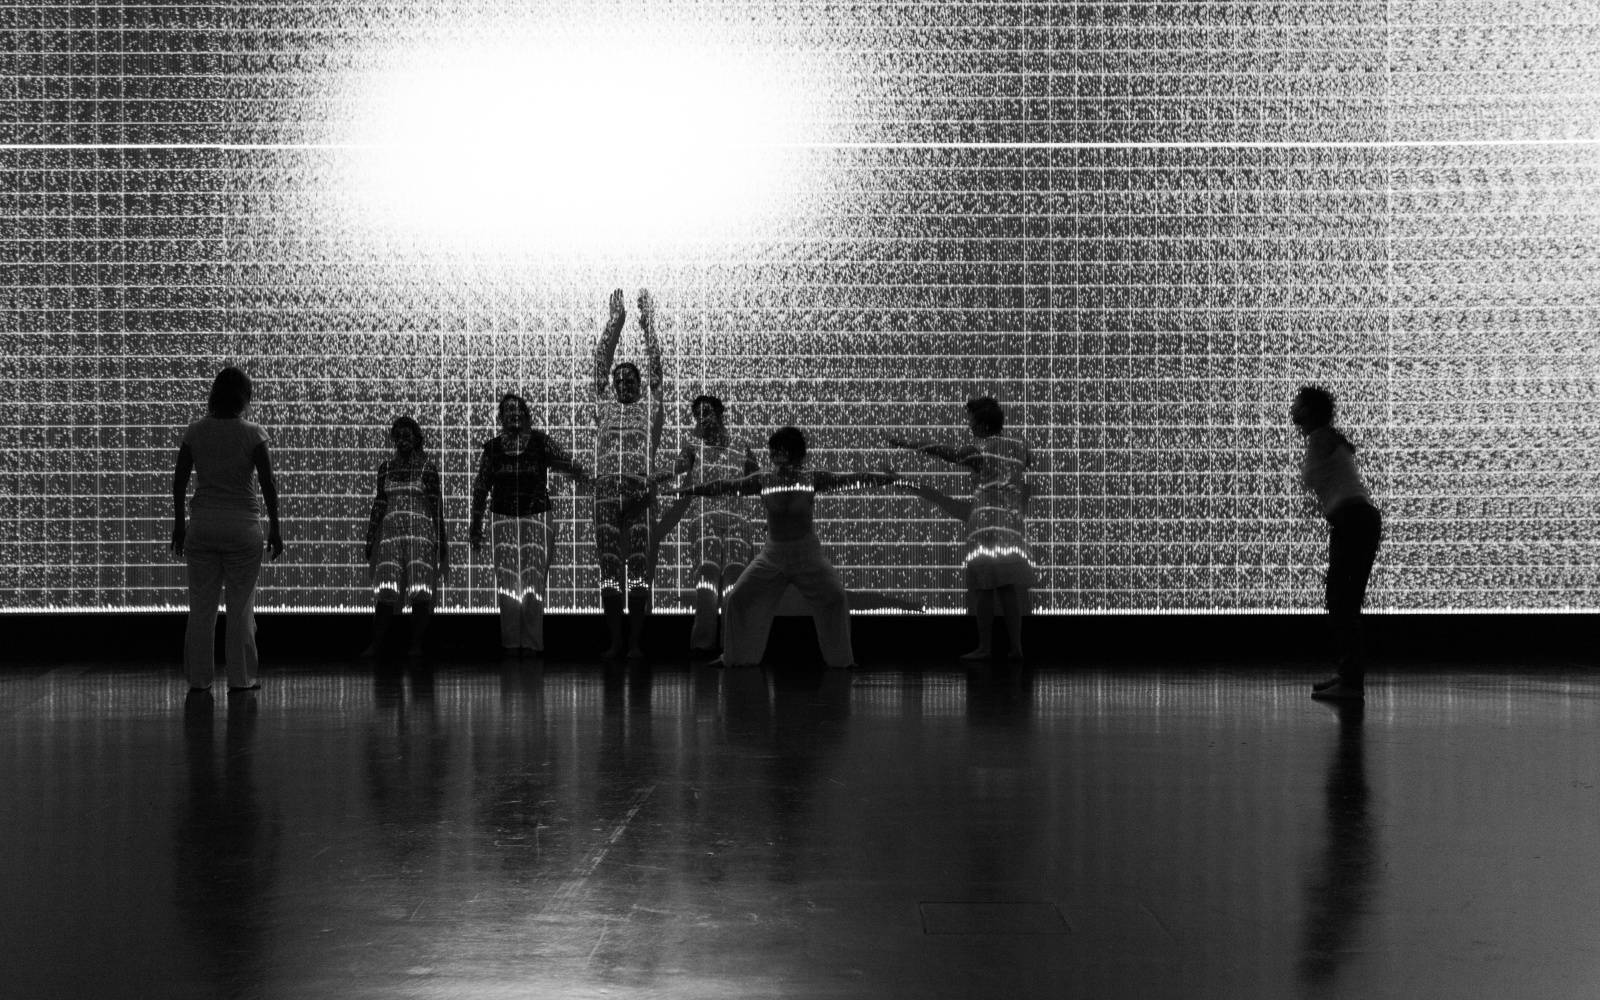 A group of dancers is moving in front of a wall with black and white projections.